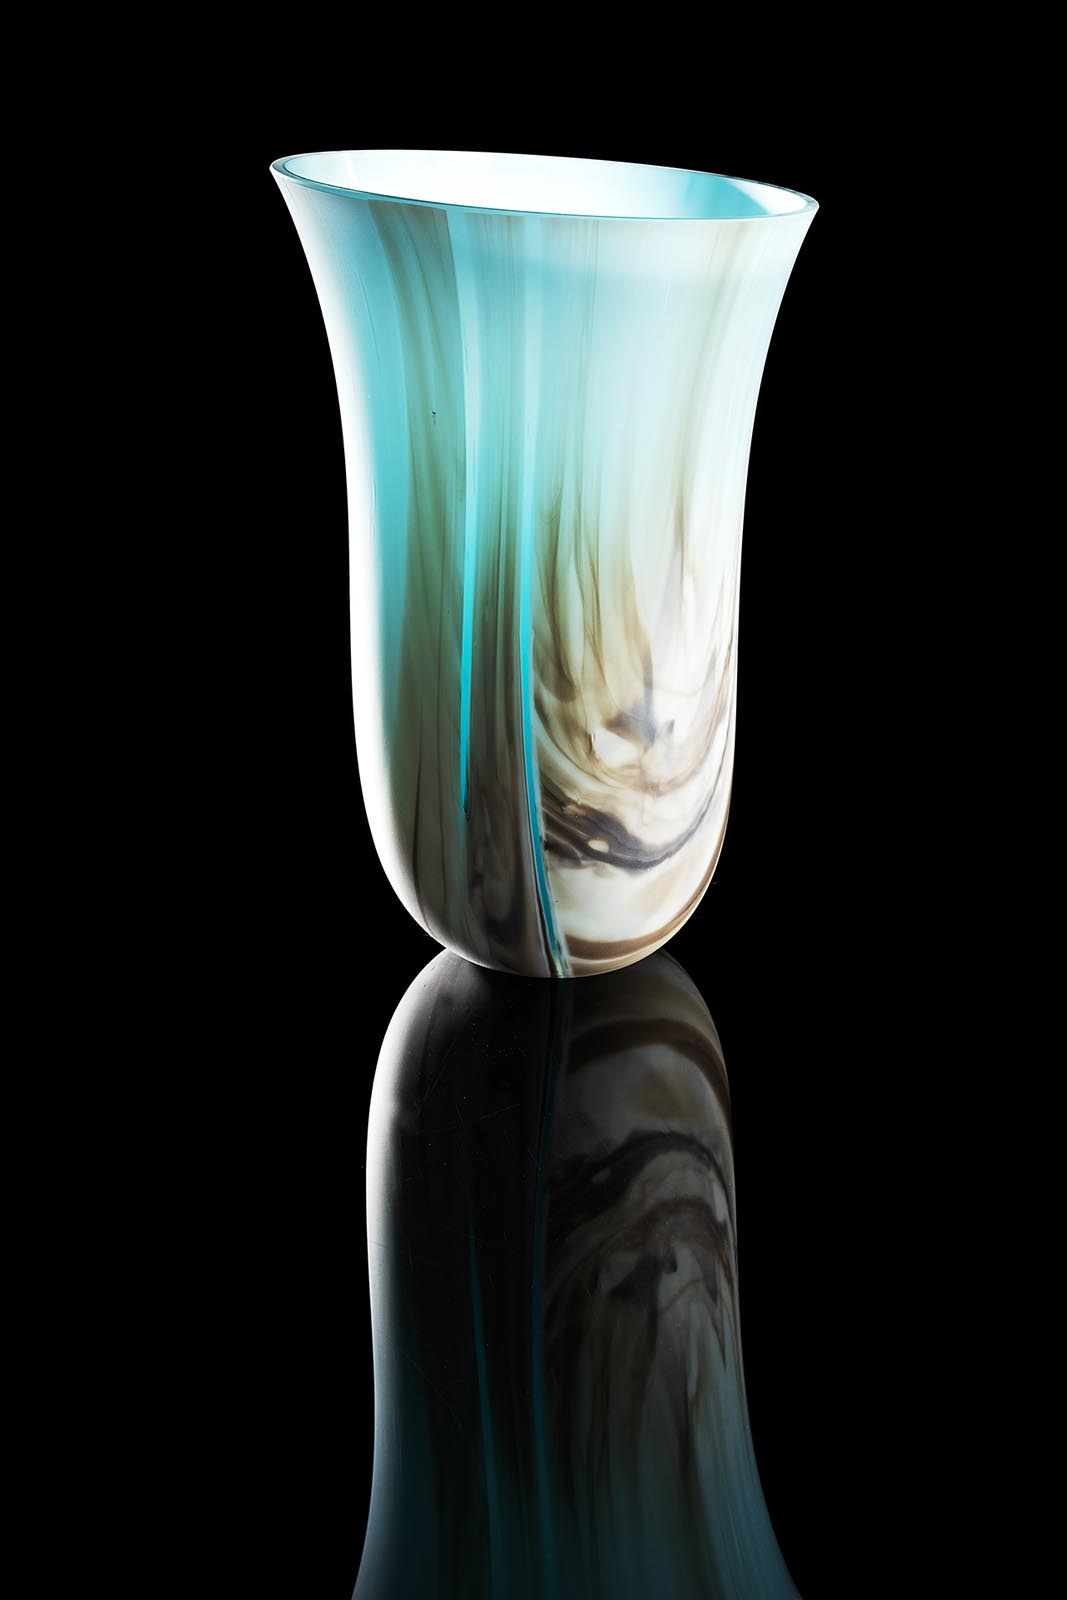 Scandza collection glass vessel - contemporary Irish glassware hand made in Ireland by Keith Sheppard Glass Artistry, Northern Ireland